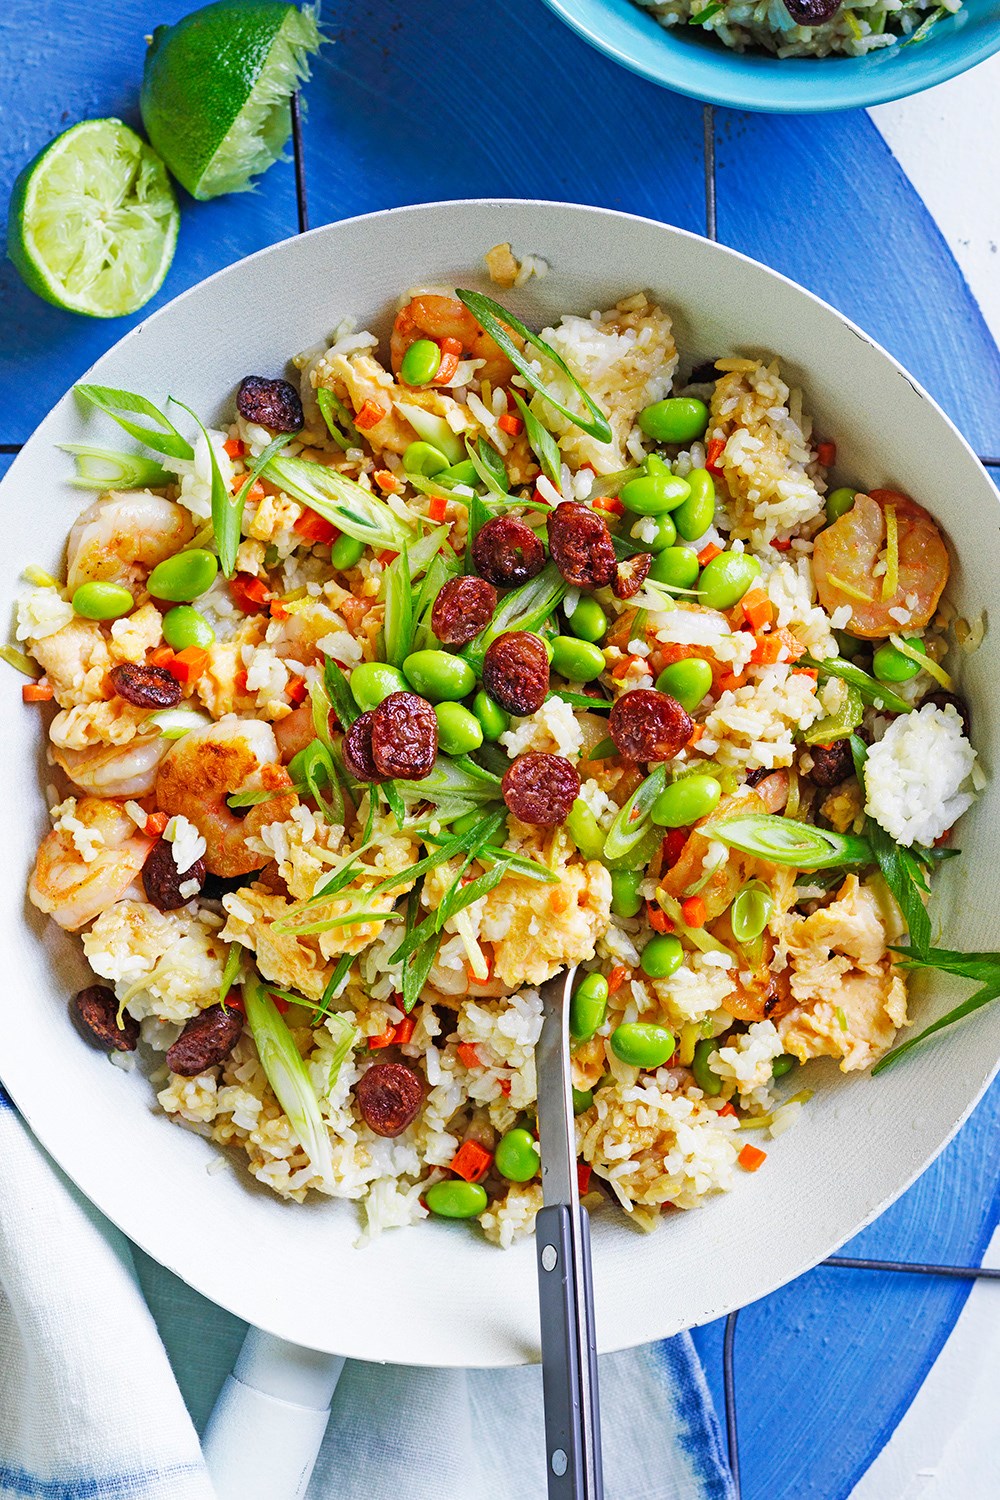 Classic fried rice Recipe | Better Homes and Gardens